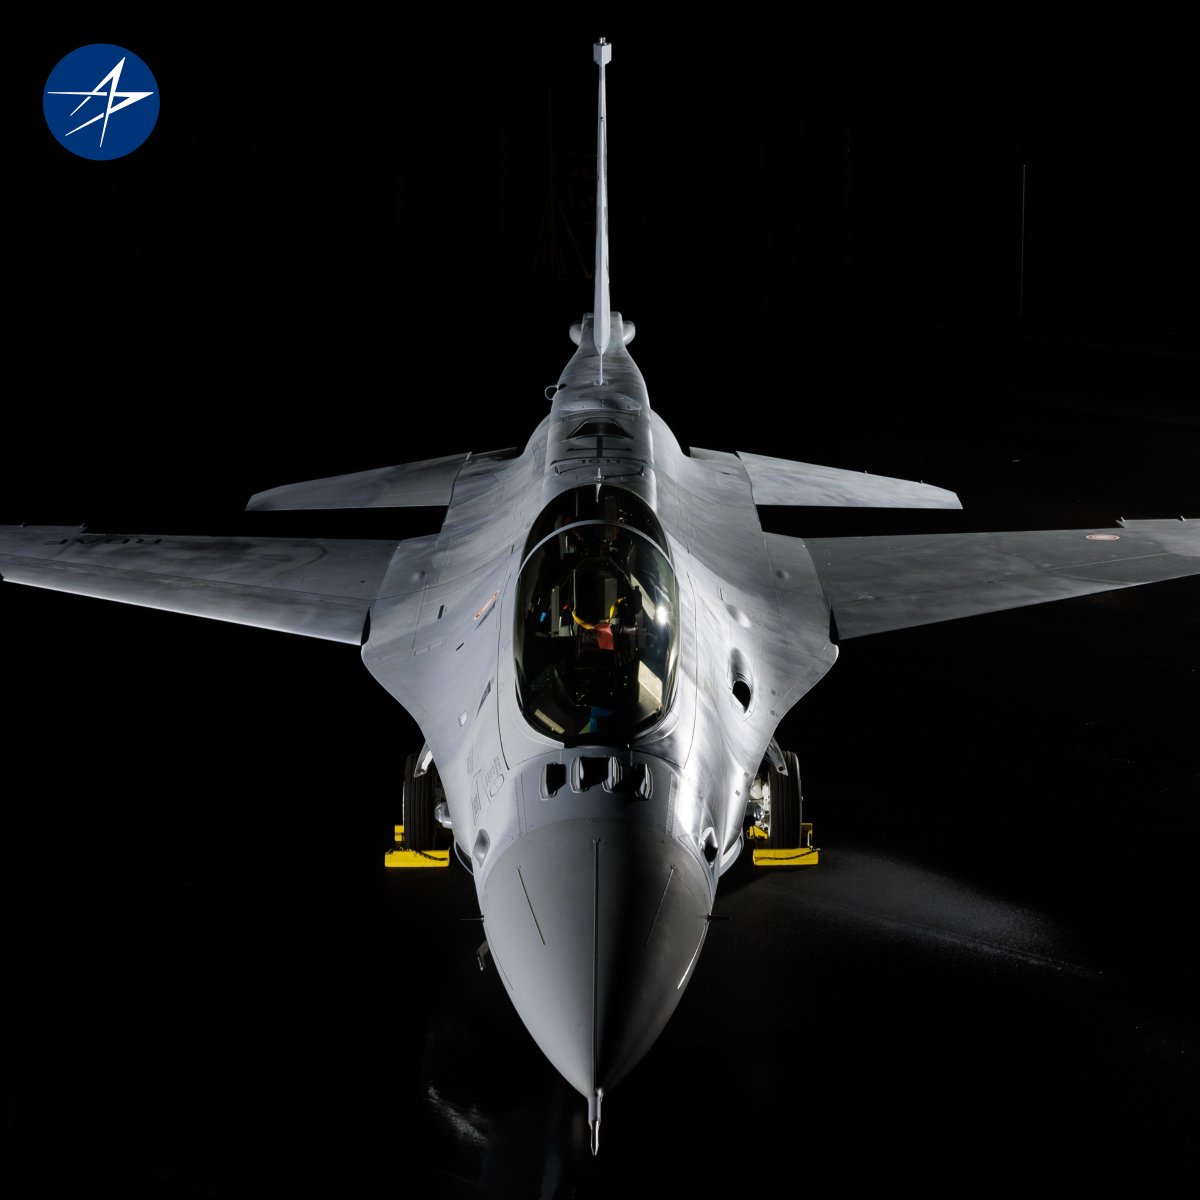 Meet the F-16 Block 70: Equipped with SABR APG-83 AESA fire control radar, it boasts 5th Generation fighter radar capabilities, delivering unparalleled situational awareness and all-weather targeting precision. Learn more: lmt.co/3K0Y7Q3